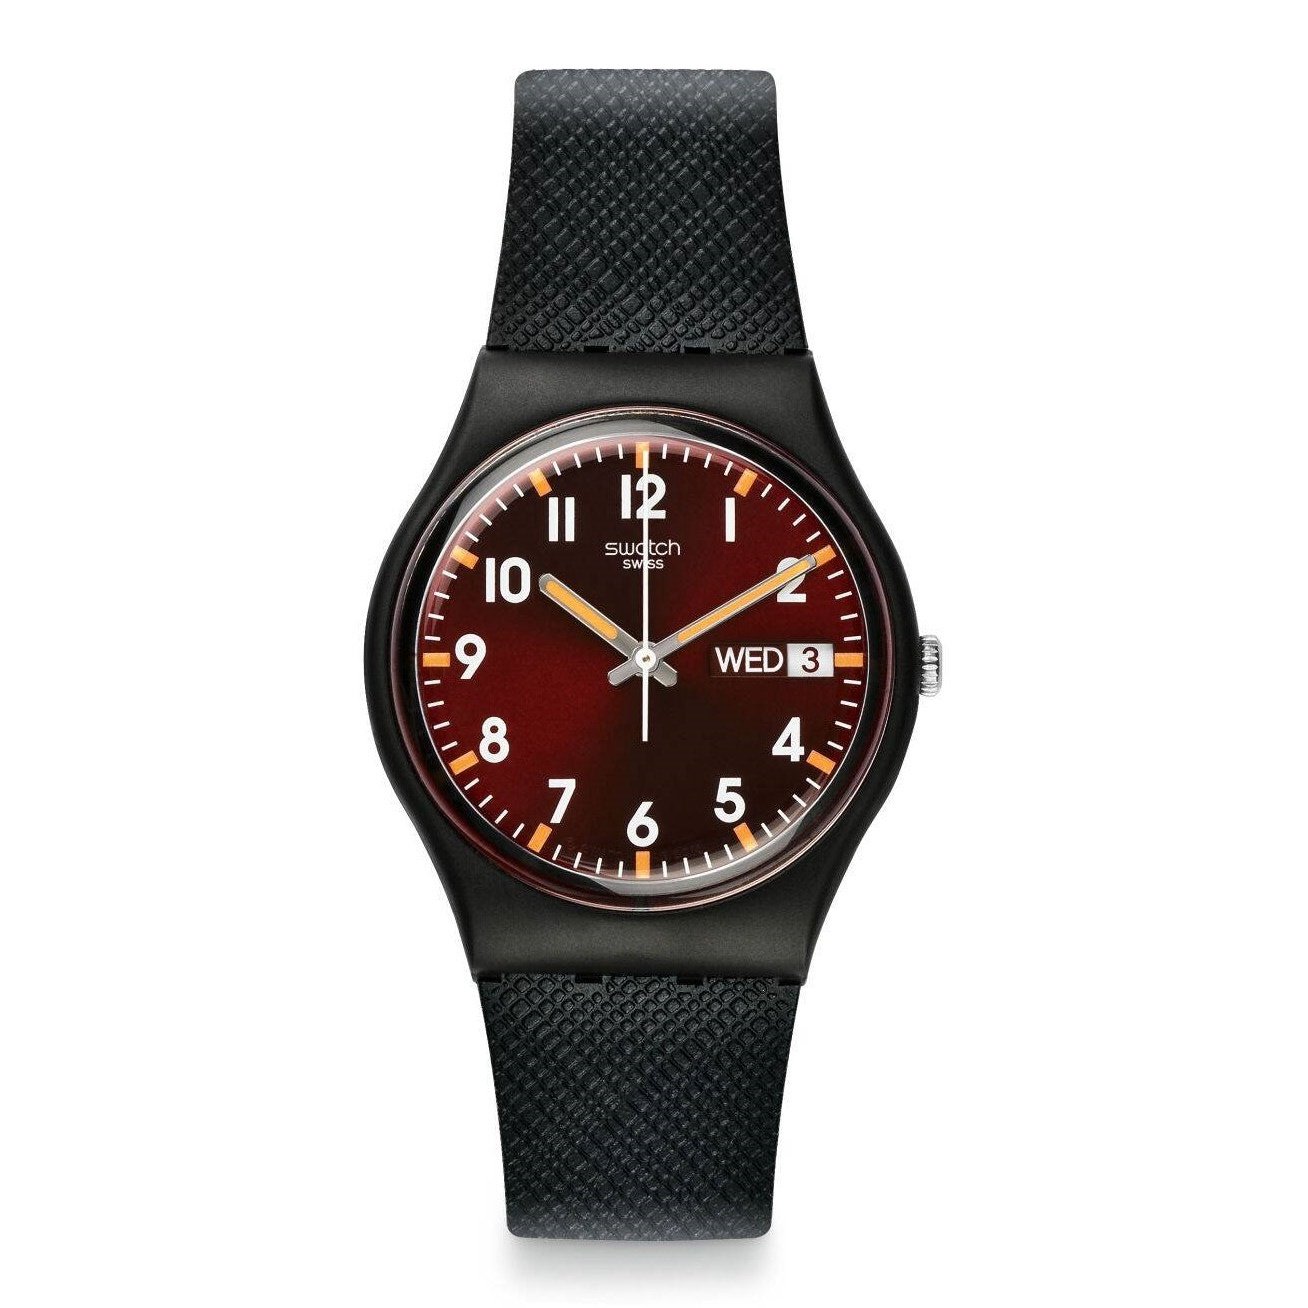 SIR RED Swatch